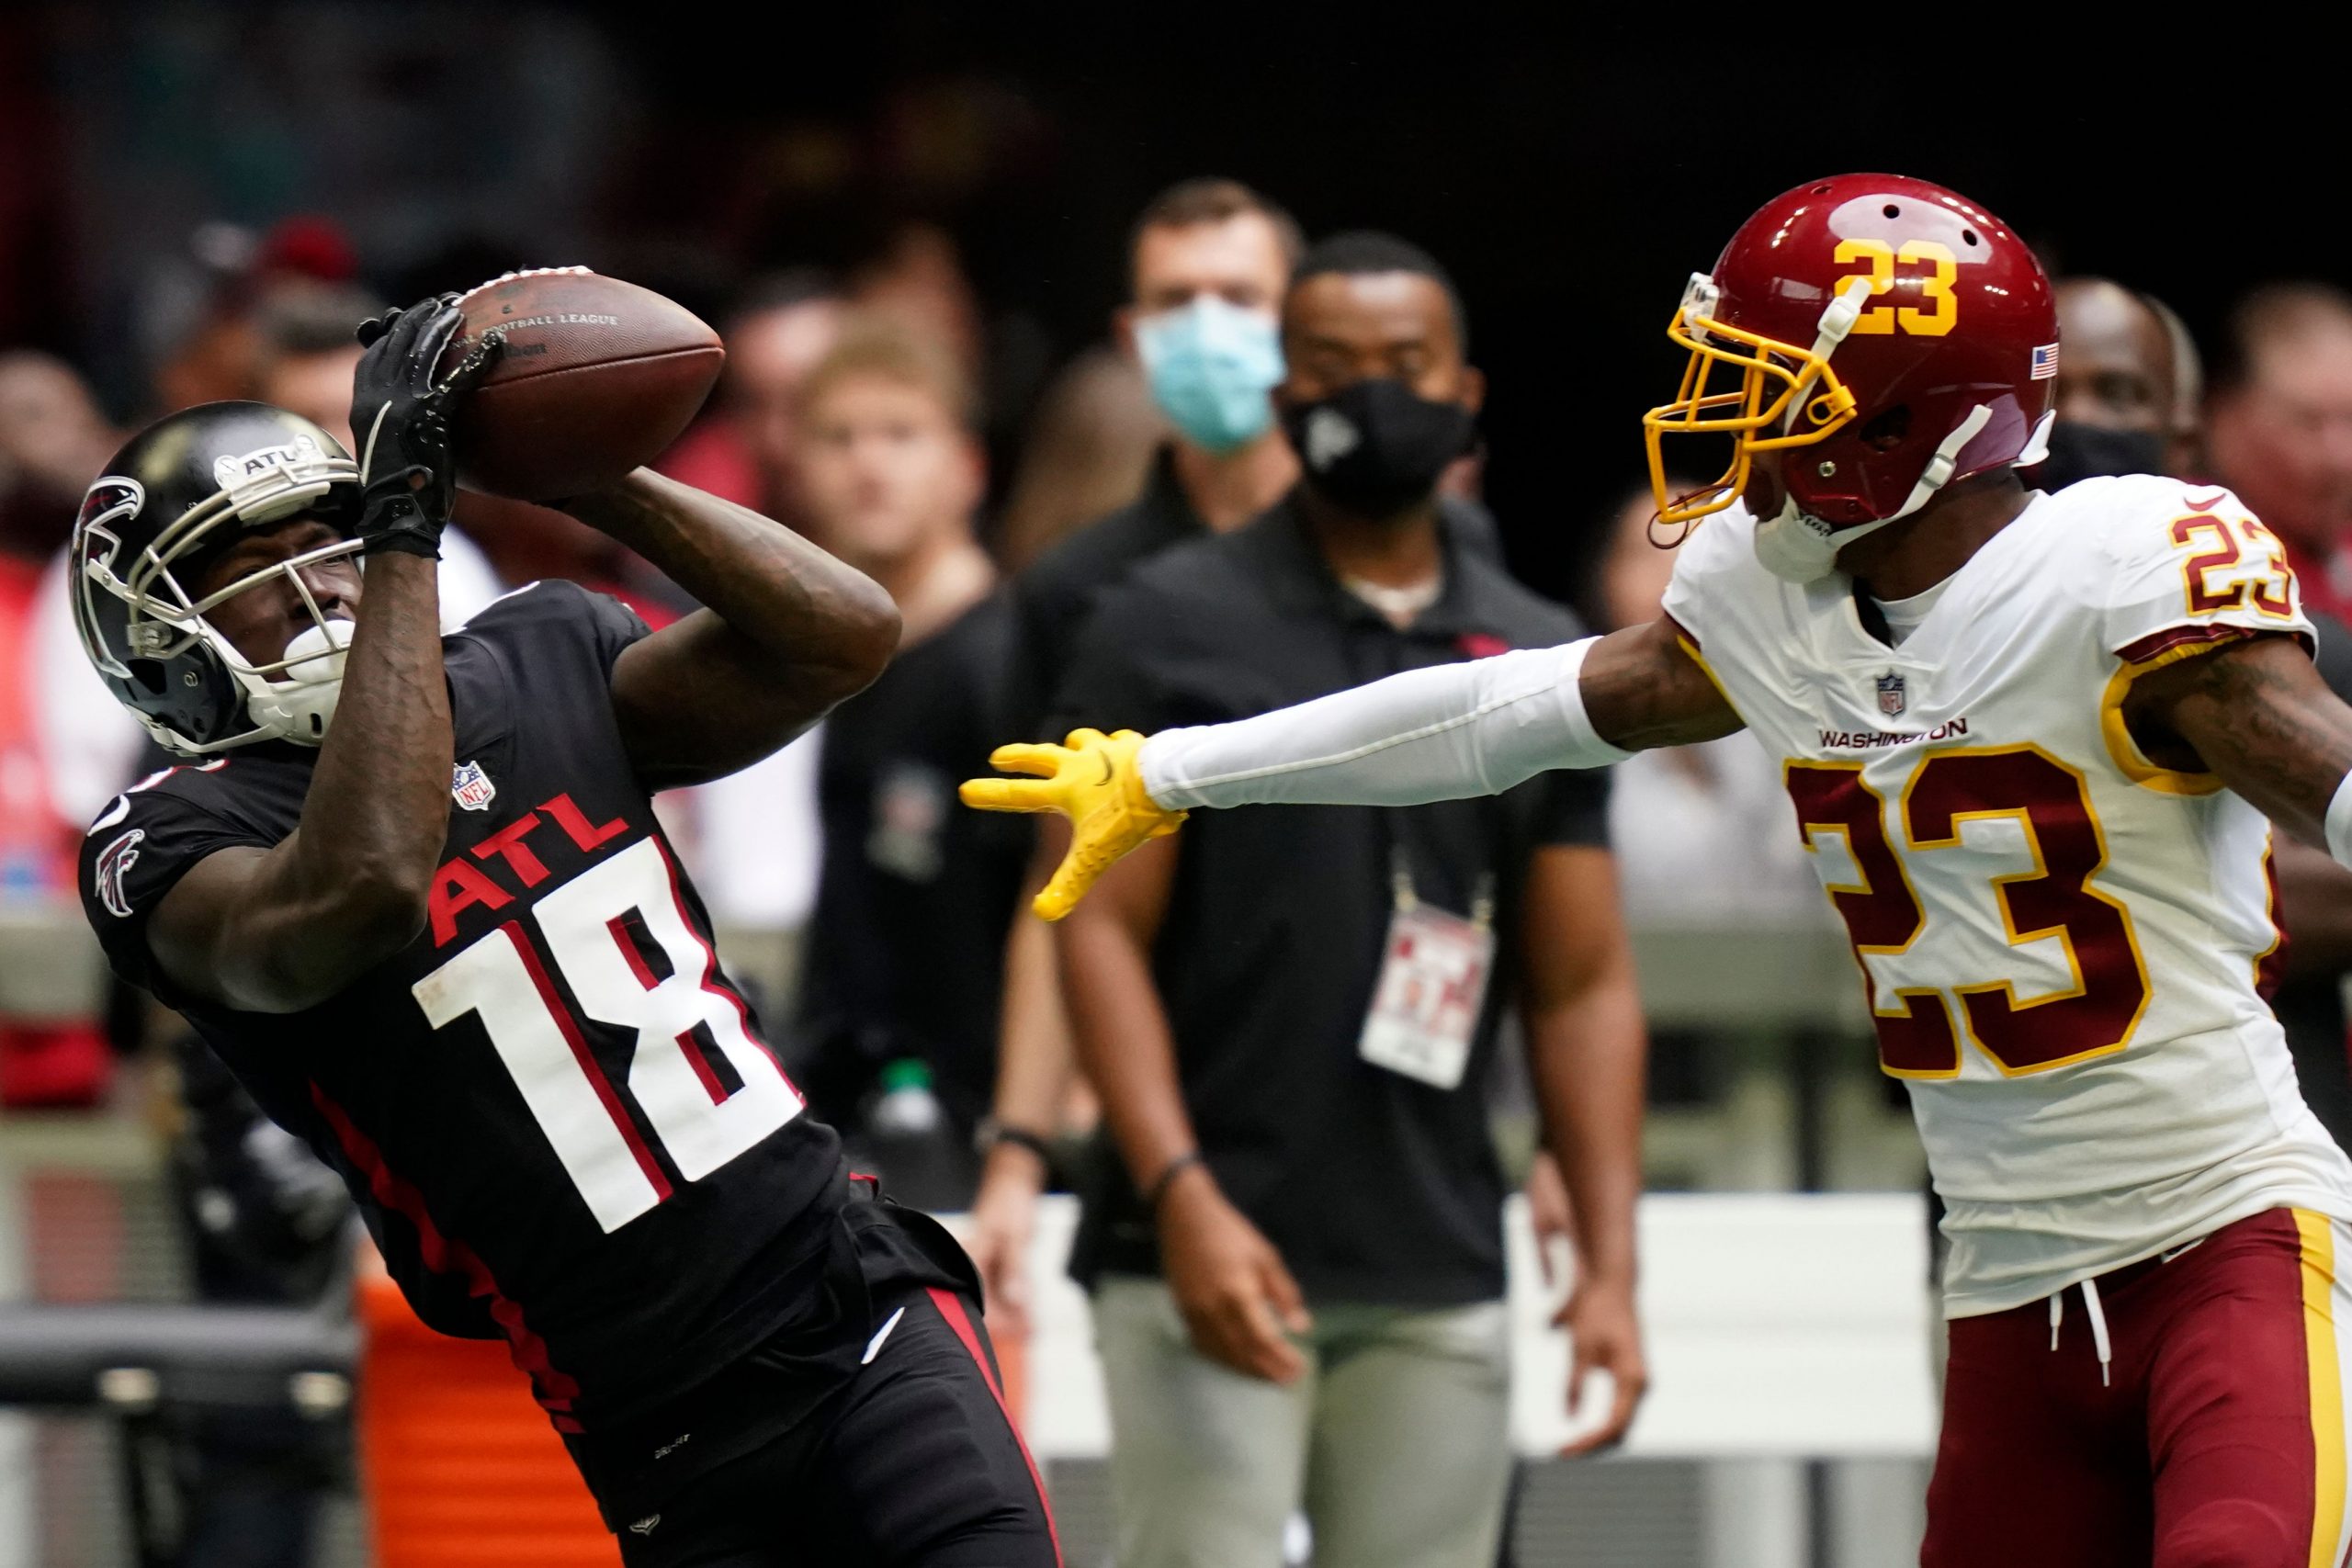 NFL: Atlanta Falcons WR Calvin Ridley to miss New York Jets for personal reasons